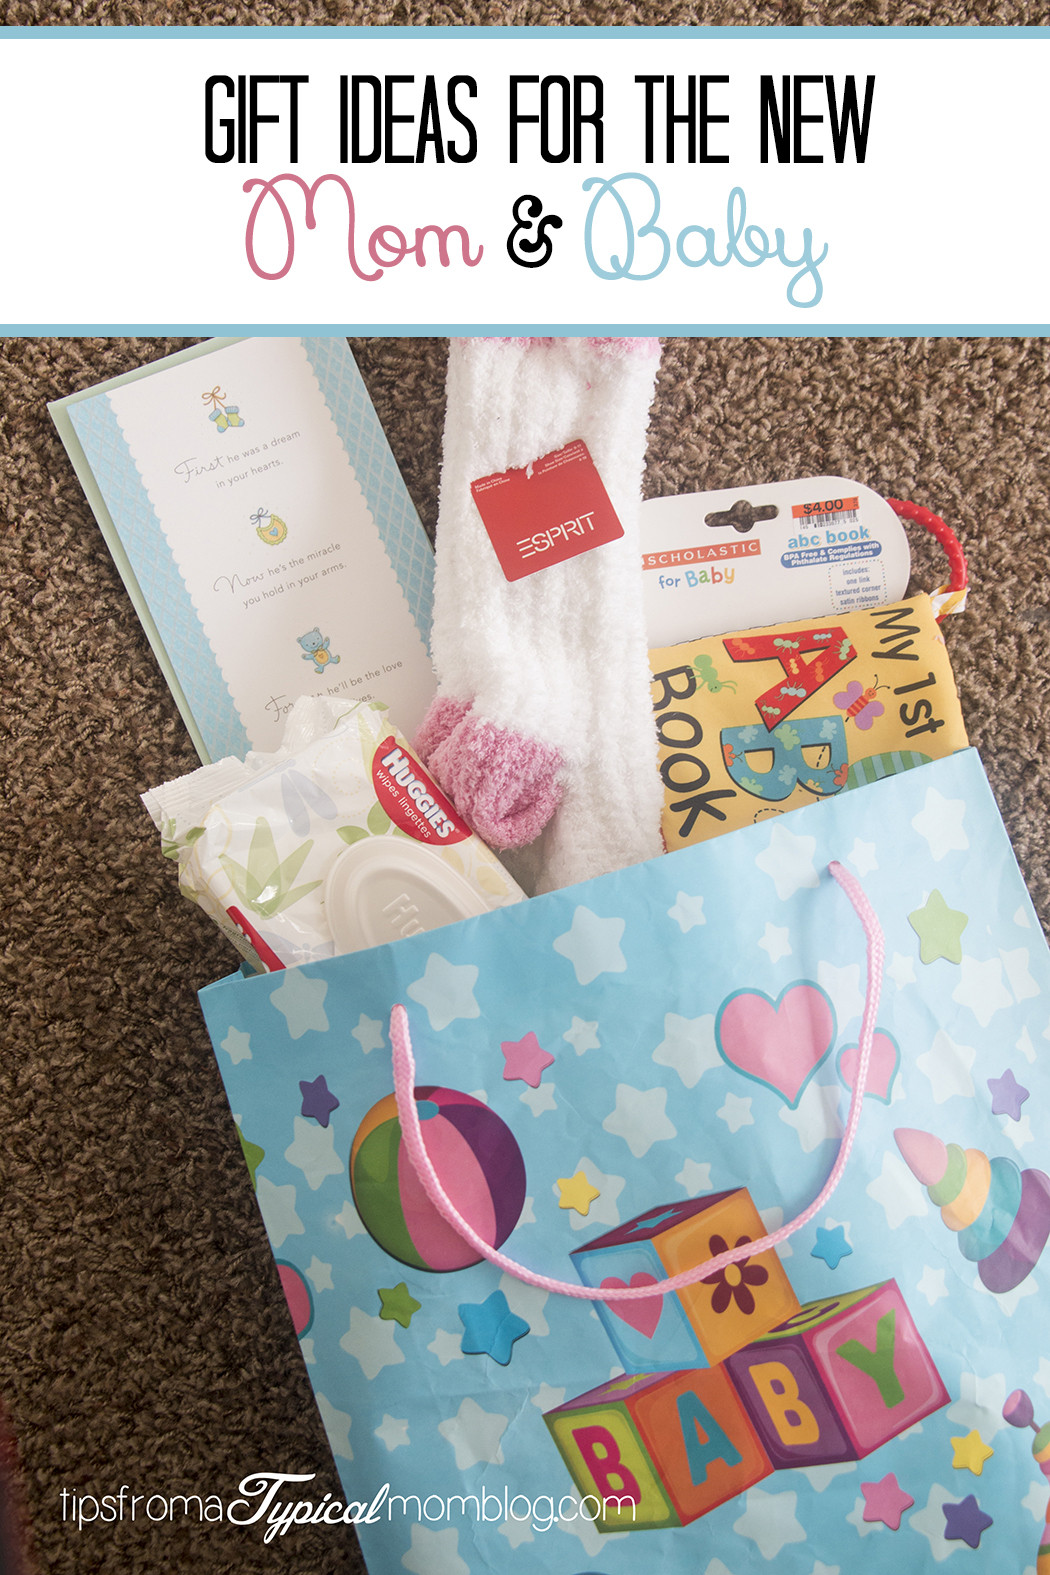 New Mother Gift Ideas
 Gift Ideas for the New Mom and Baby Tips from a Typical Mom